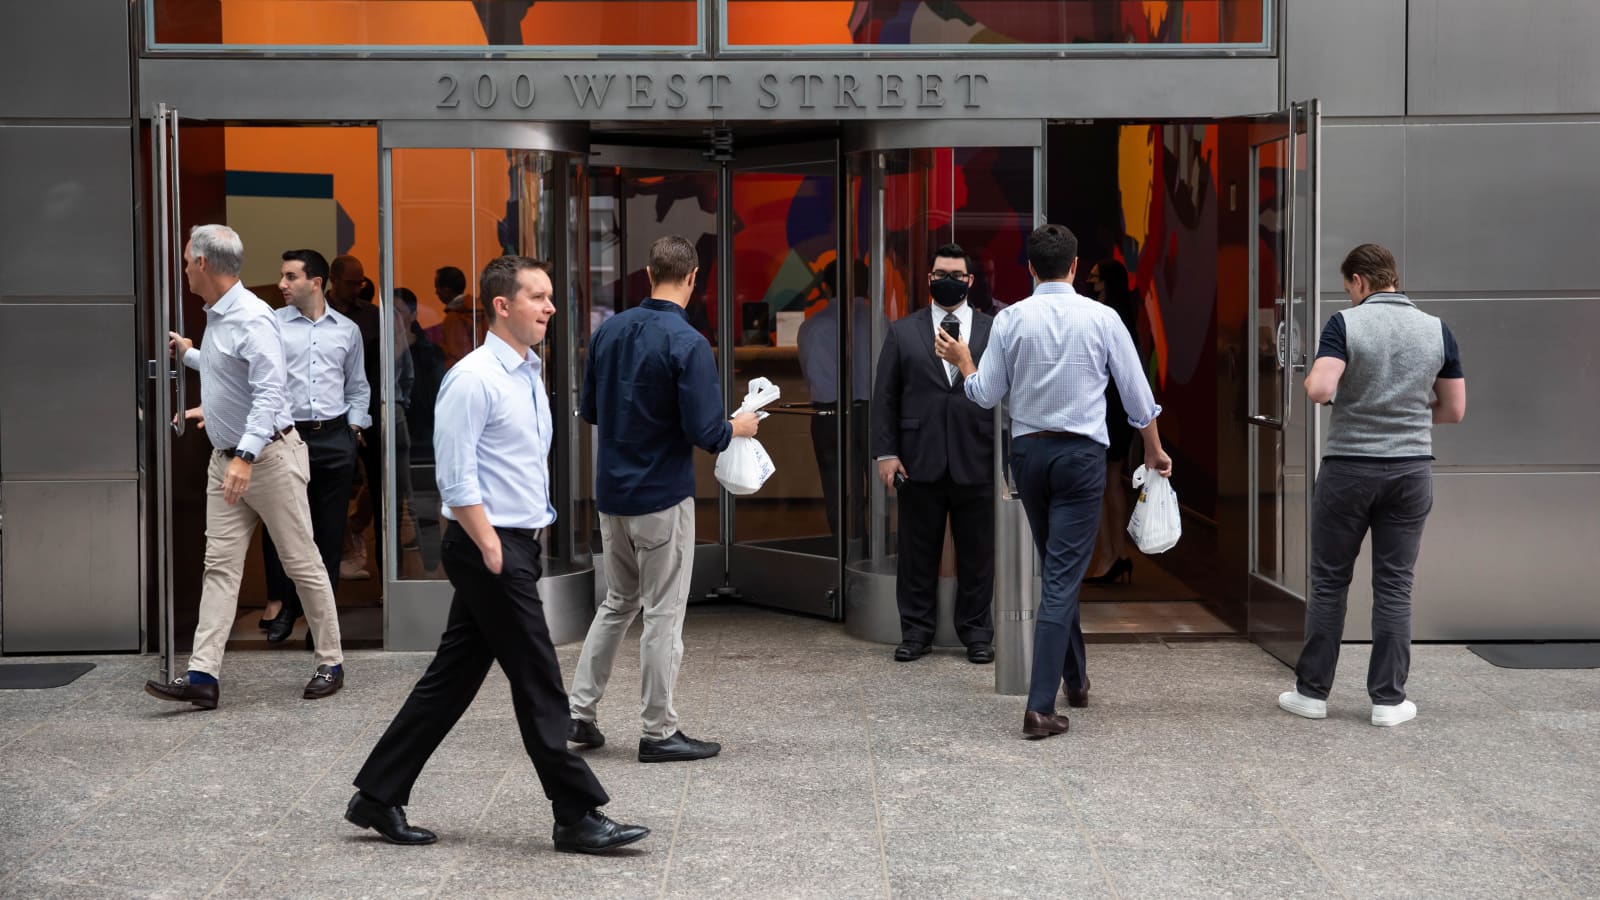 hiring 2,000 people in New York City, opening big new